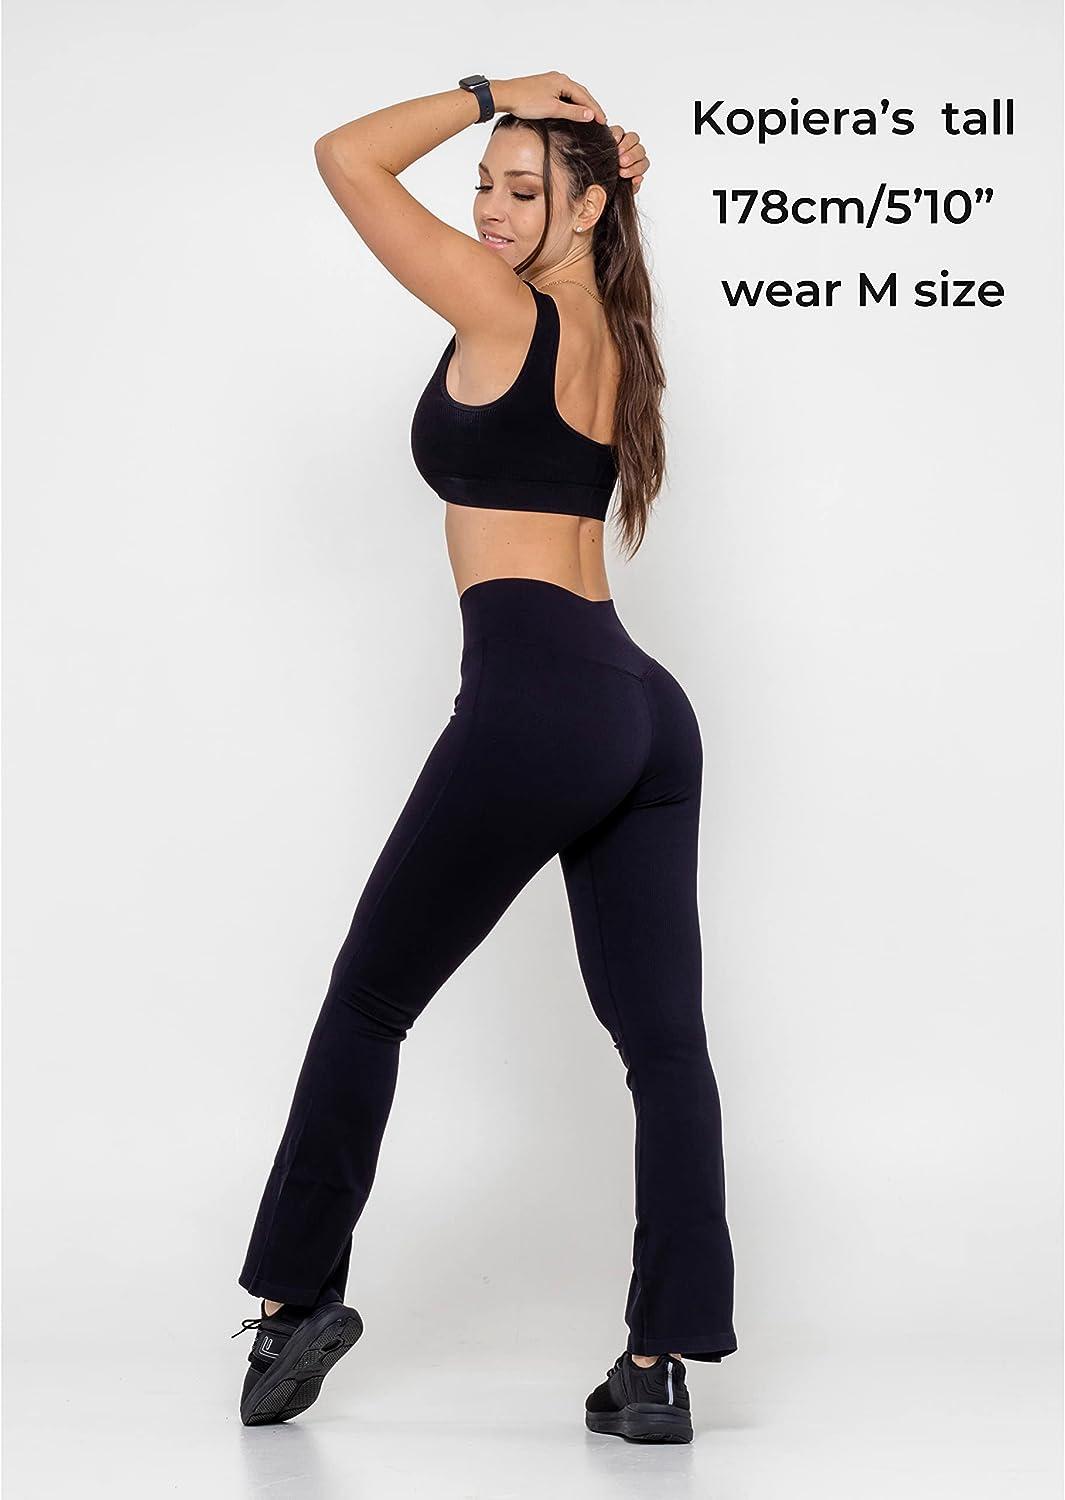  Women's High Waisted Seamless Contour Leggings Ankle Yoga  Leggings Running Workout Tights Black : Clothing, Shoes & Jewelry